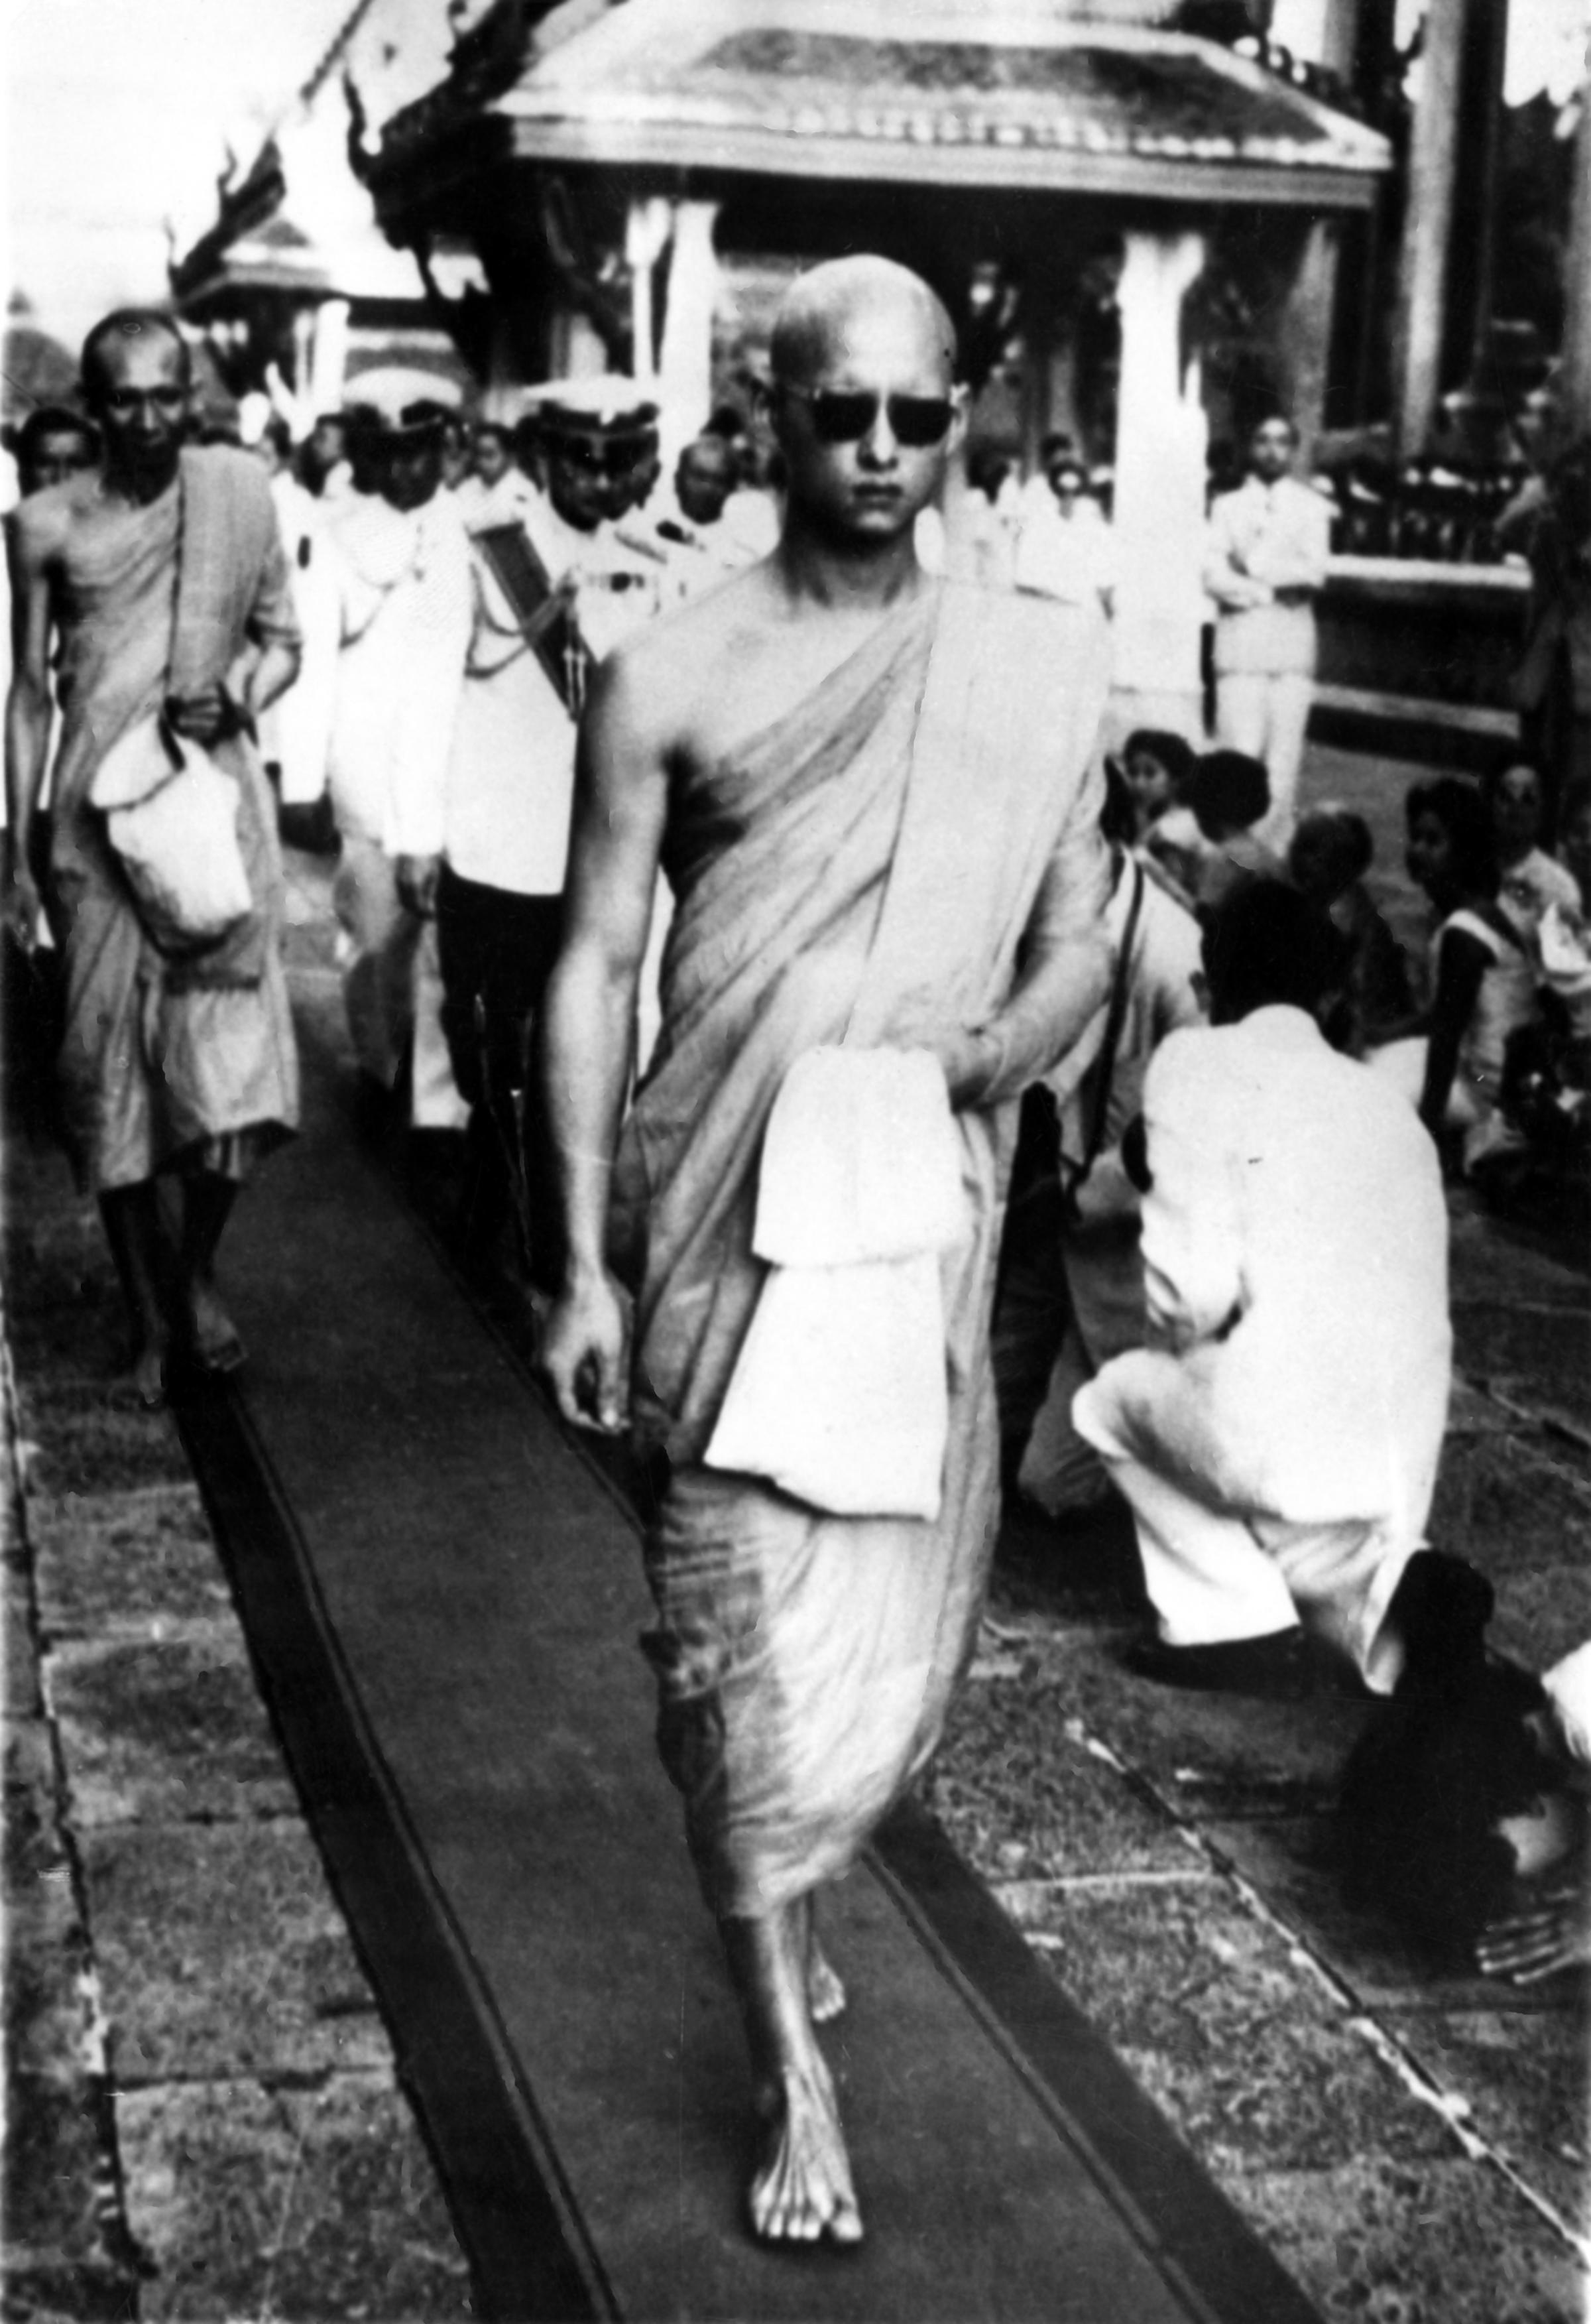 King Bhumibol Adulyadej, with head shaven and wearing the yellow robes of a monk, leaves a buddhist temple in Bangkok after being ordained a monk for two weeks in 1956.